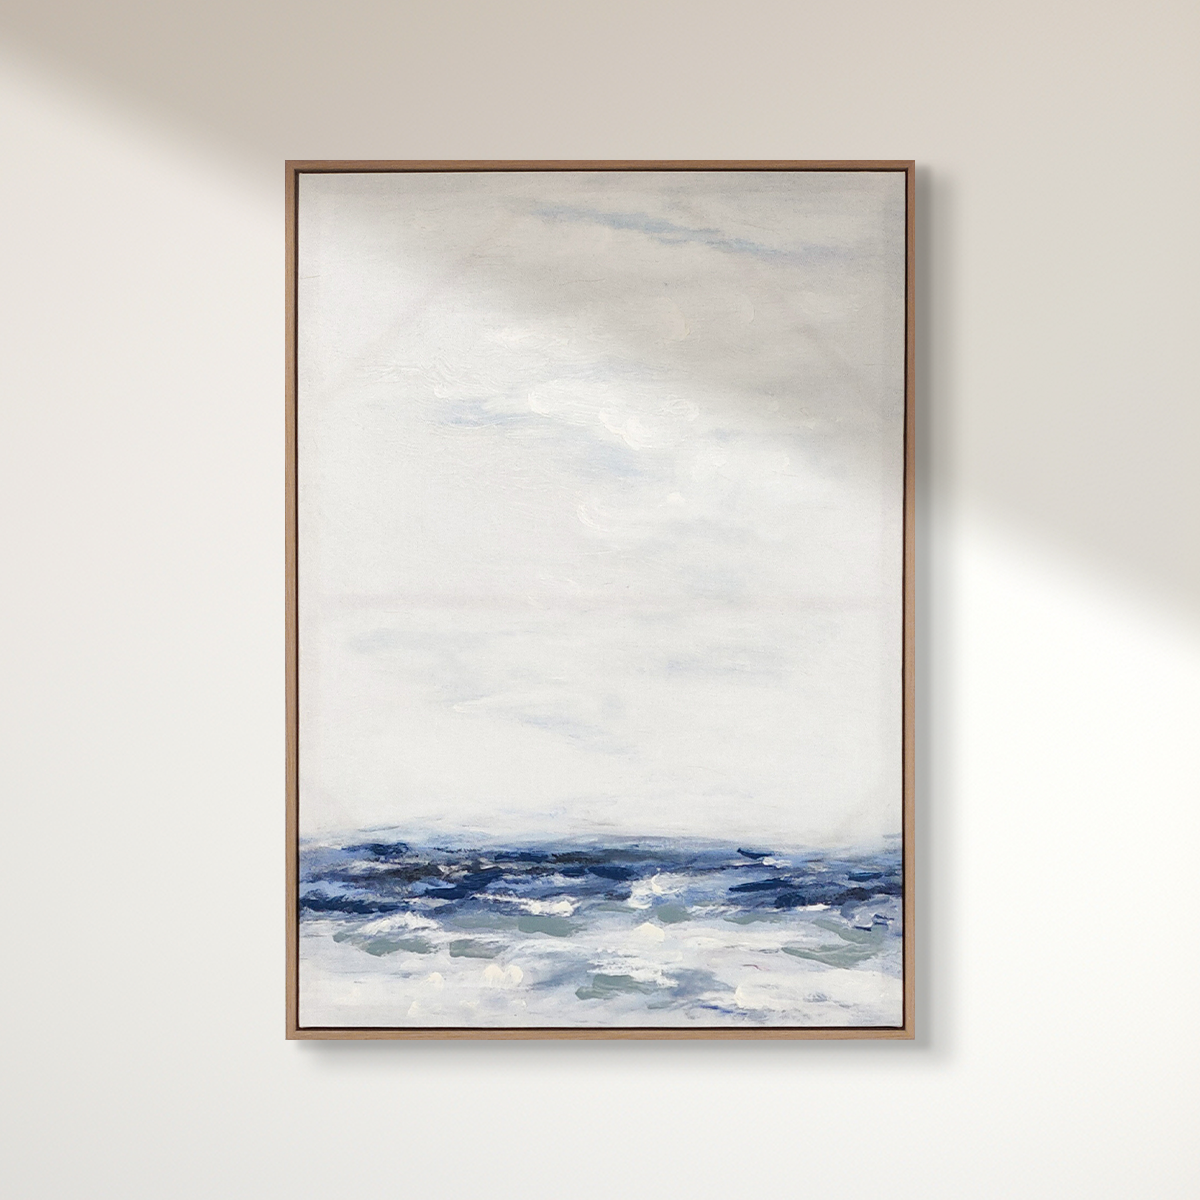 Abstract textured wall art affordable oil painting unframed white and blue sea portrait on wooden frame